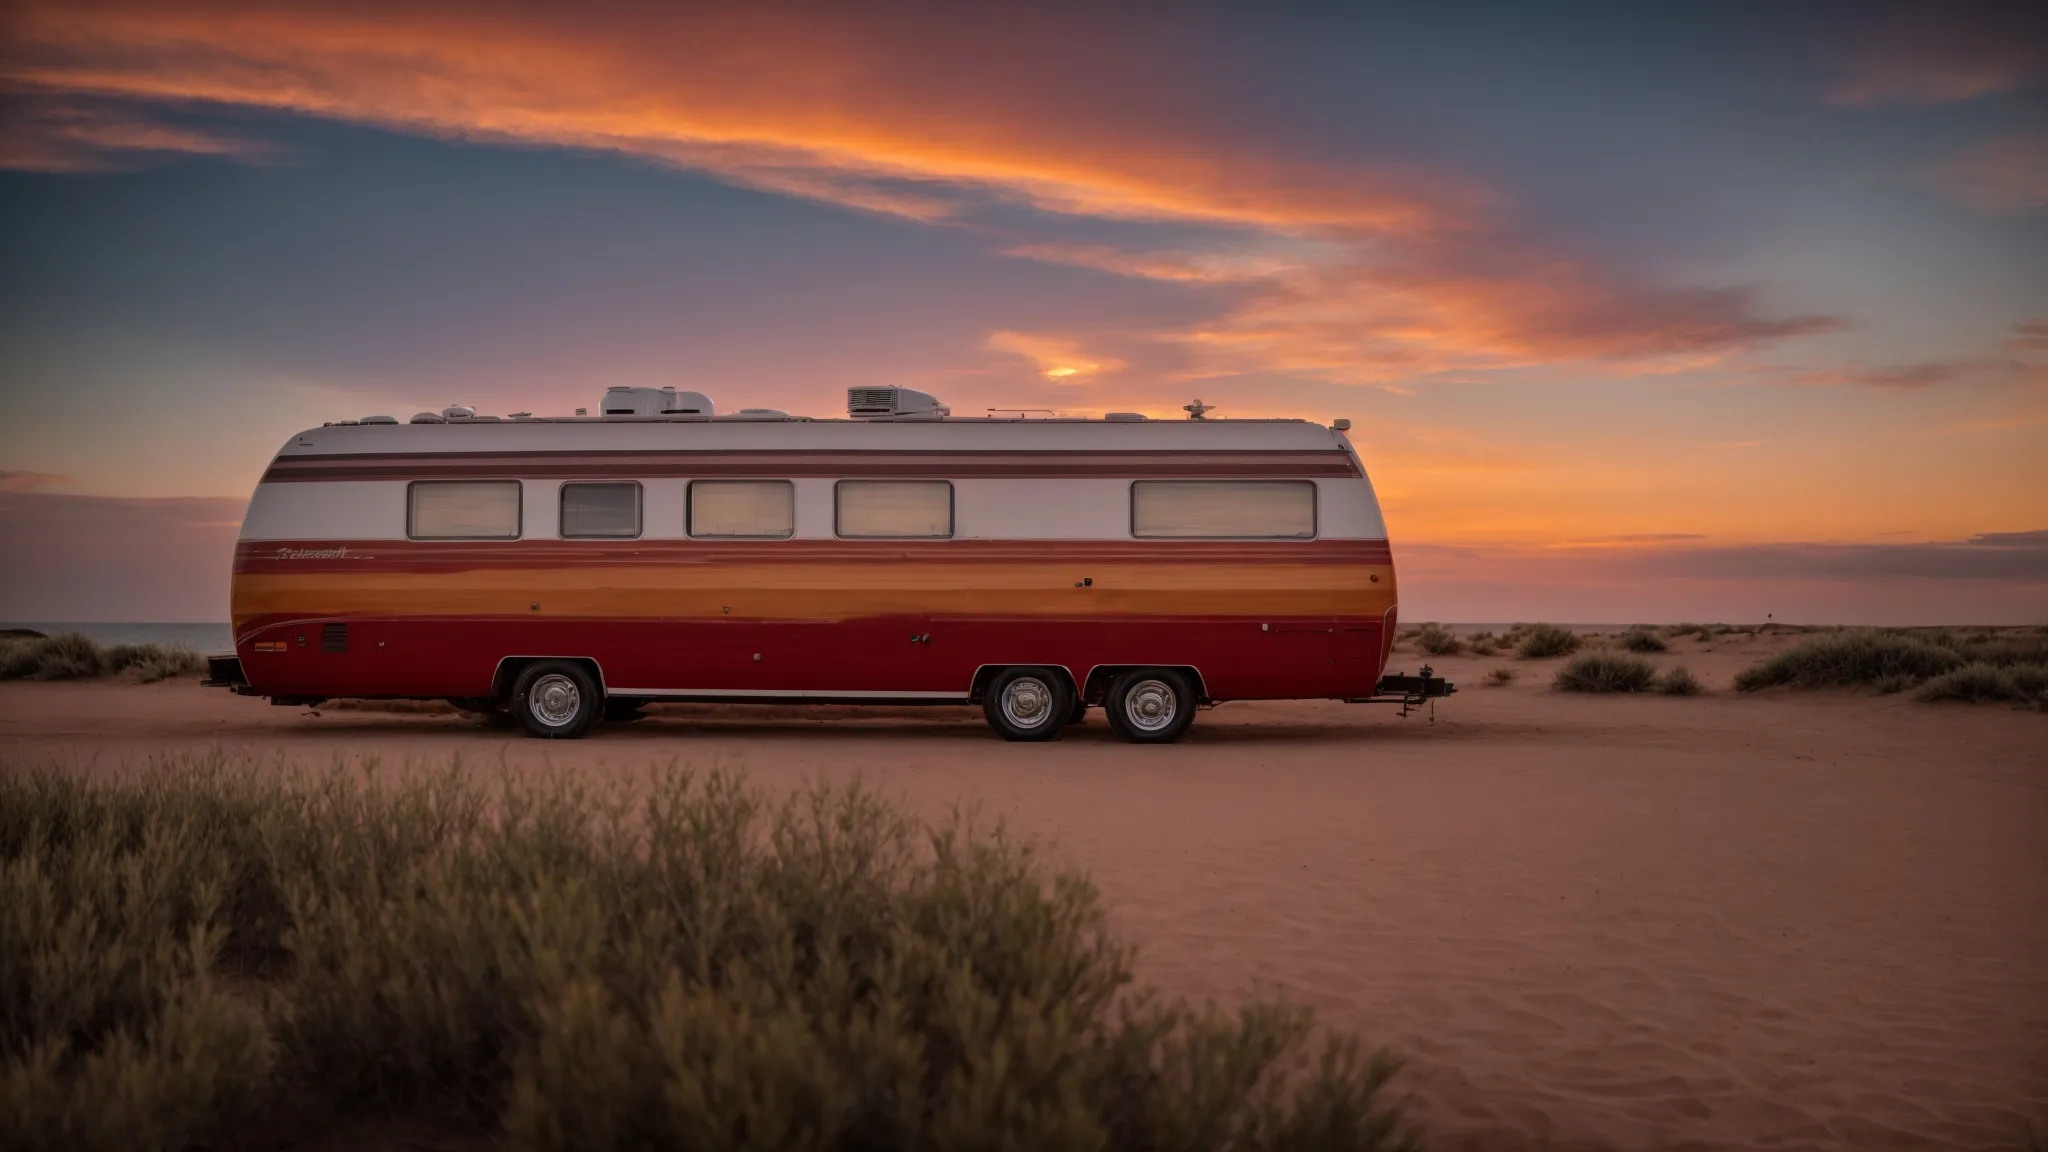 an rv sits perched by the tranquil sea as the sun dips below the horizon, painting the sky in warm hues.